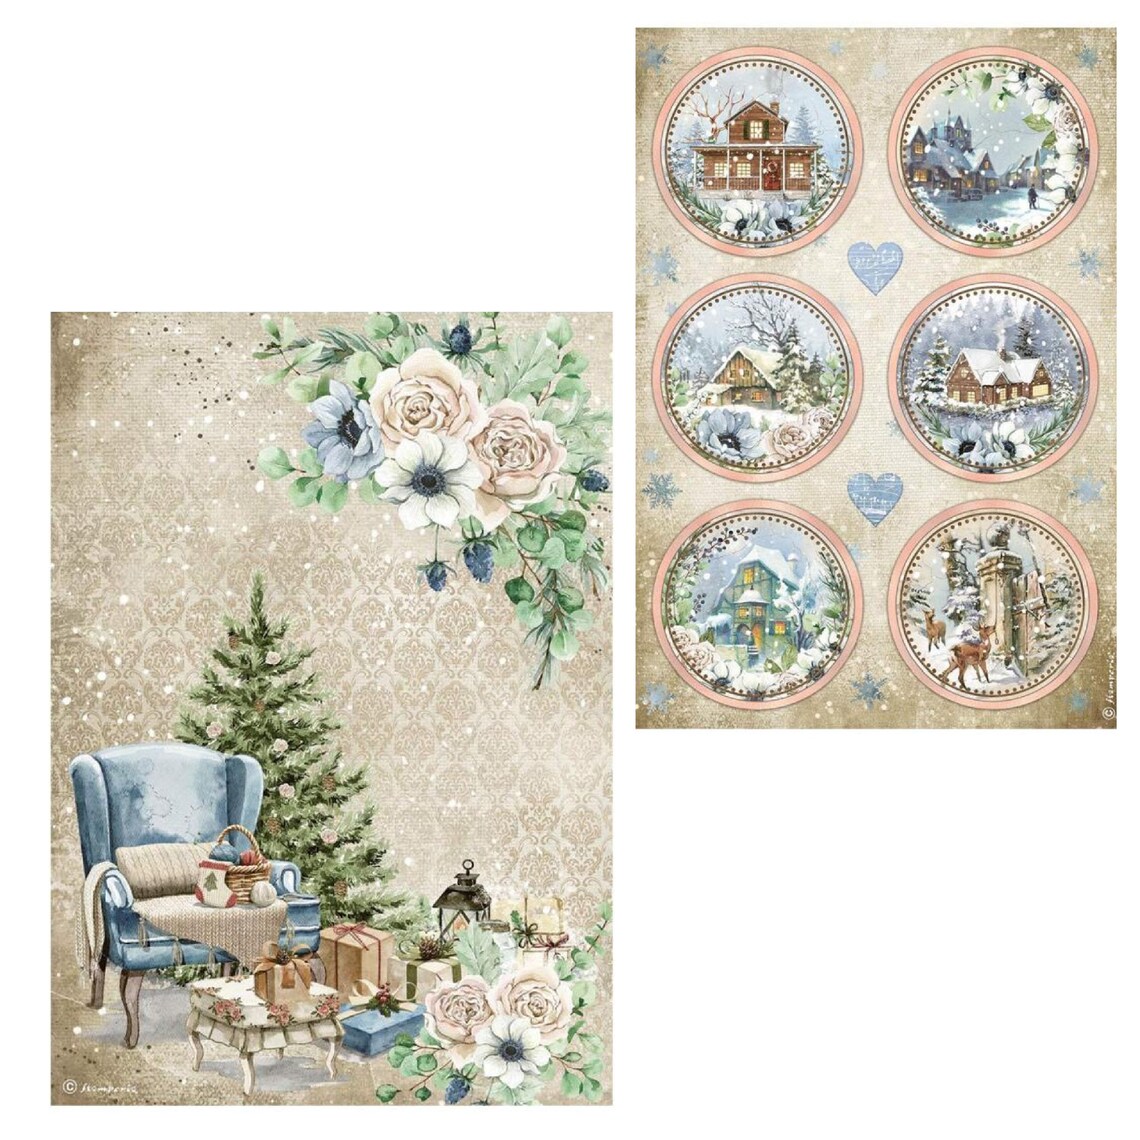 Stamperia Cozy Winter Rice Paper Embellishments crafts - Etsy